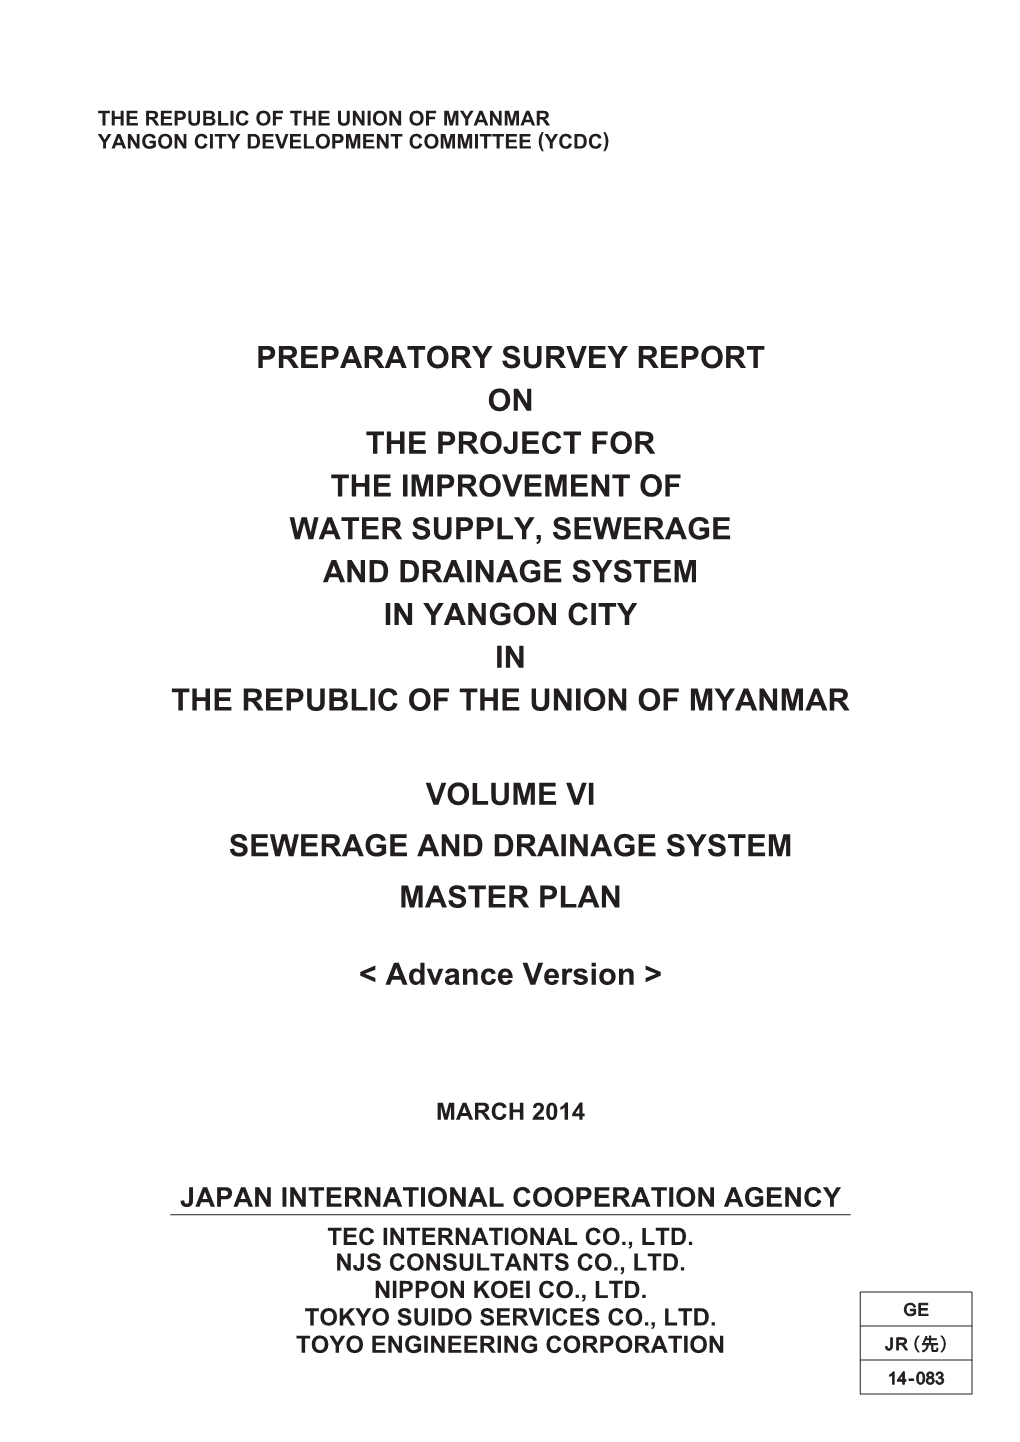 Preparatory Survey Report on the Project for the Improvement of Water Supply, Sewerage and Drainage System in Yangon City in the Republic of the Union of Myanmar